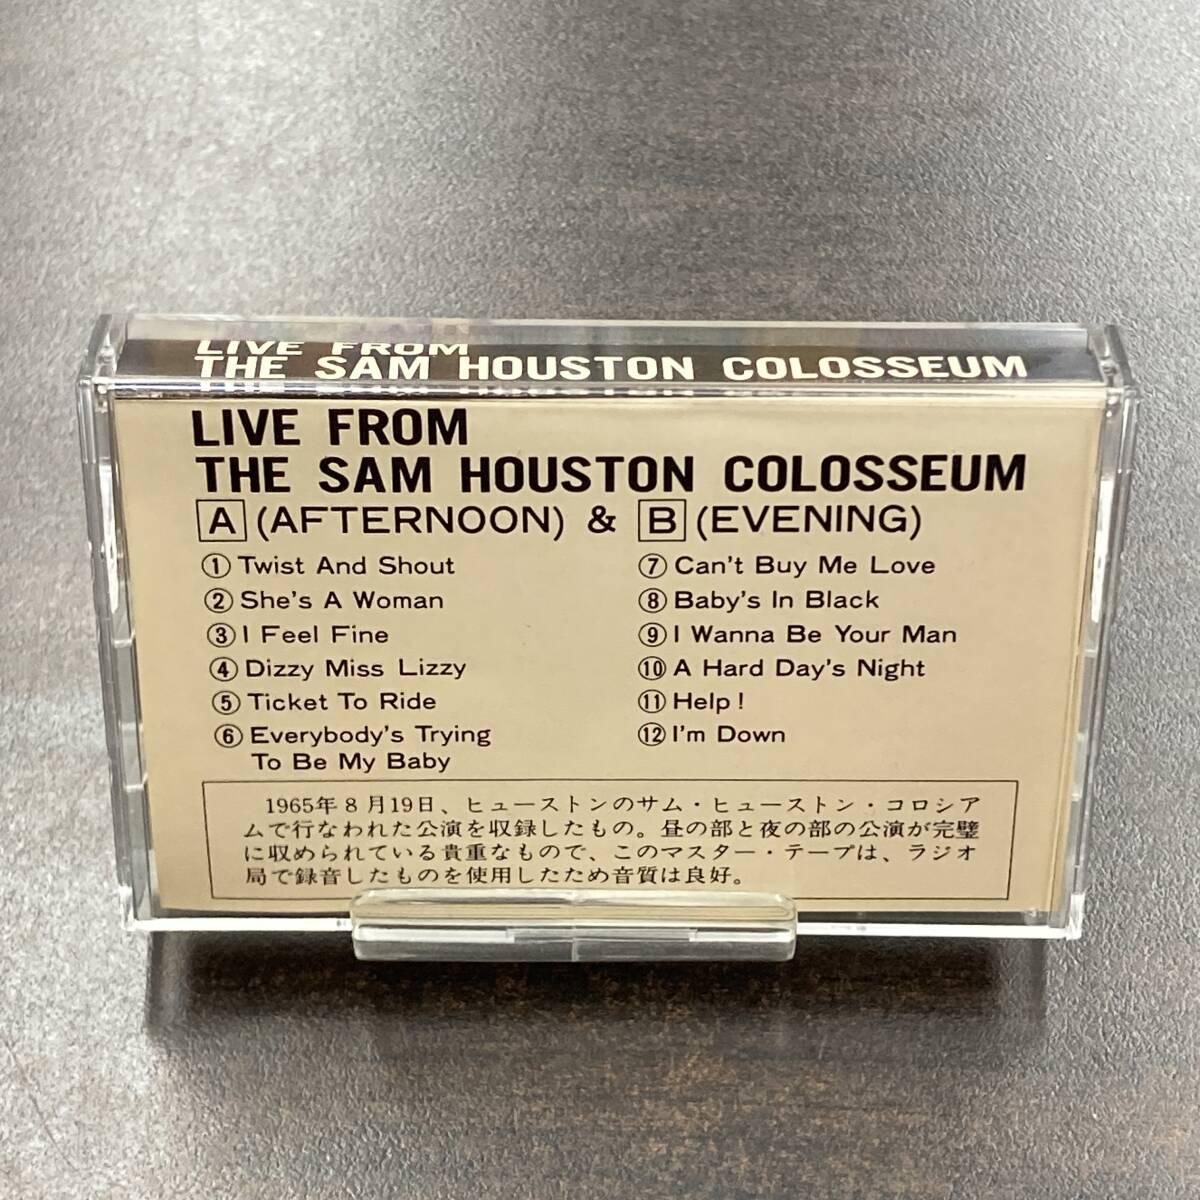 1216M ザ・ビートルズ 研究資料 LIVE FROM THE SAM HOUSTON COLOSSEUM カセットテープ / THE BEATLES Research materials Cassette Tape_画像6